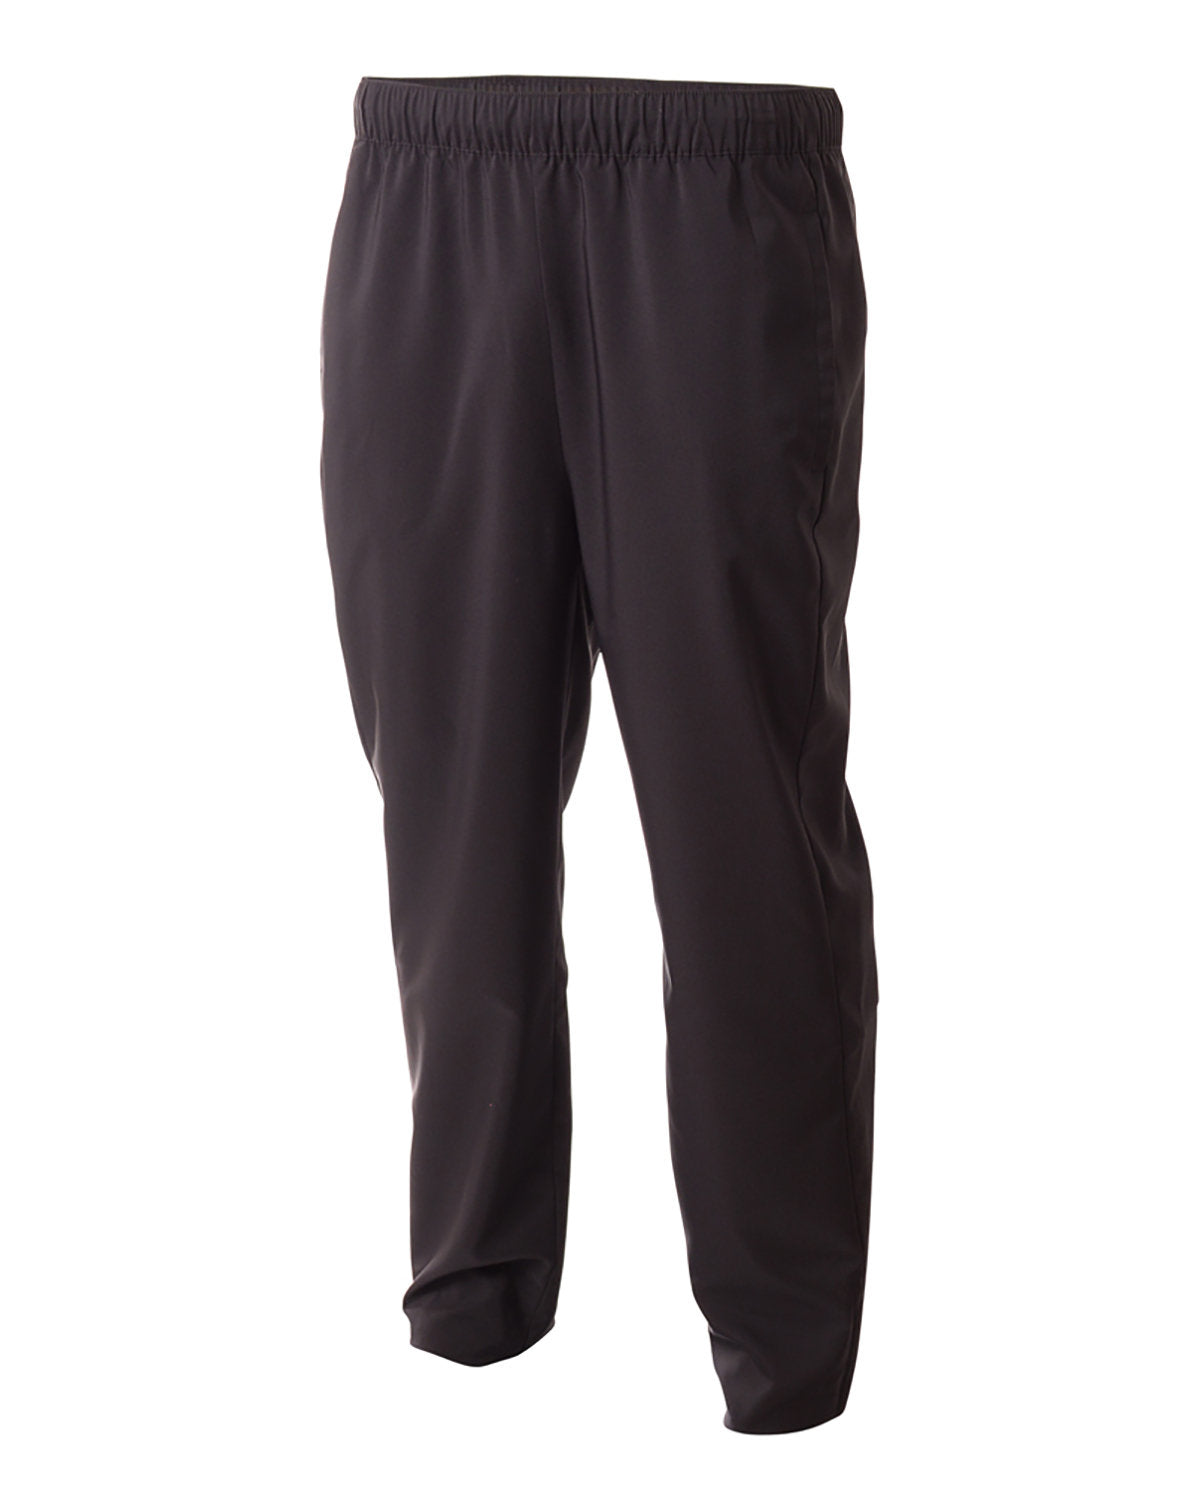 A4 Men's Element Woven Training Pant: Performance and Style